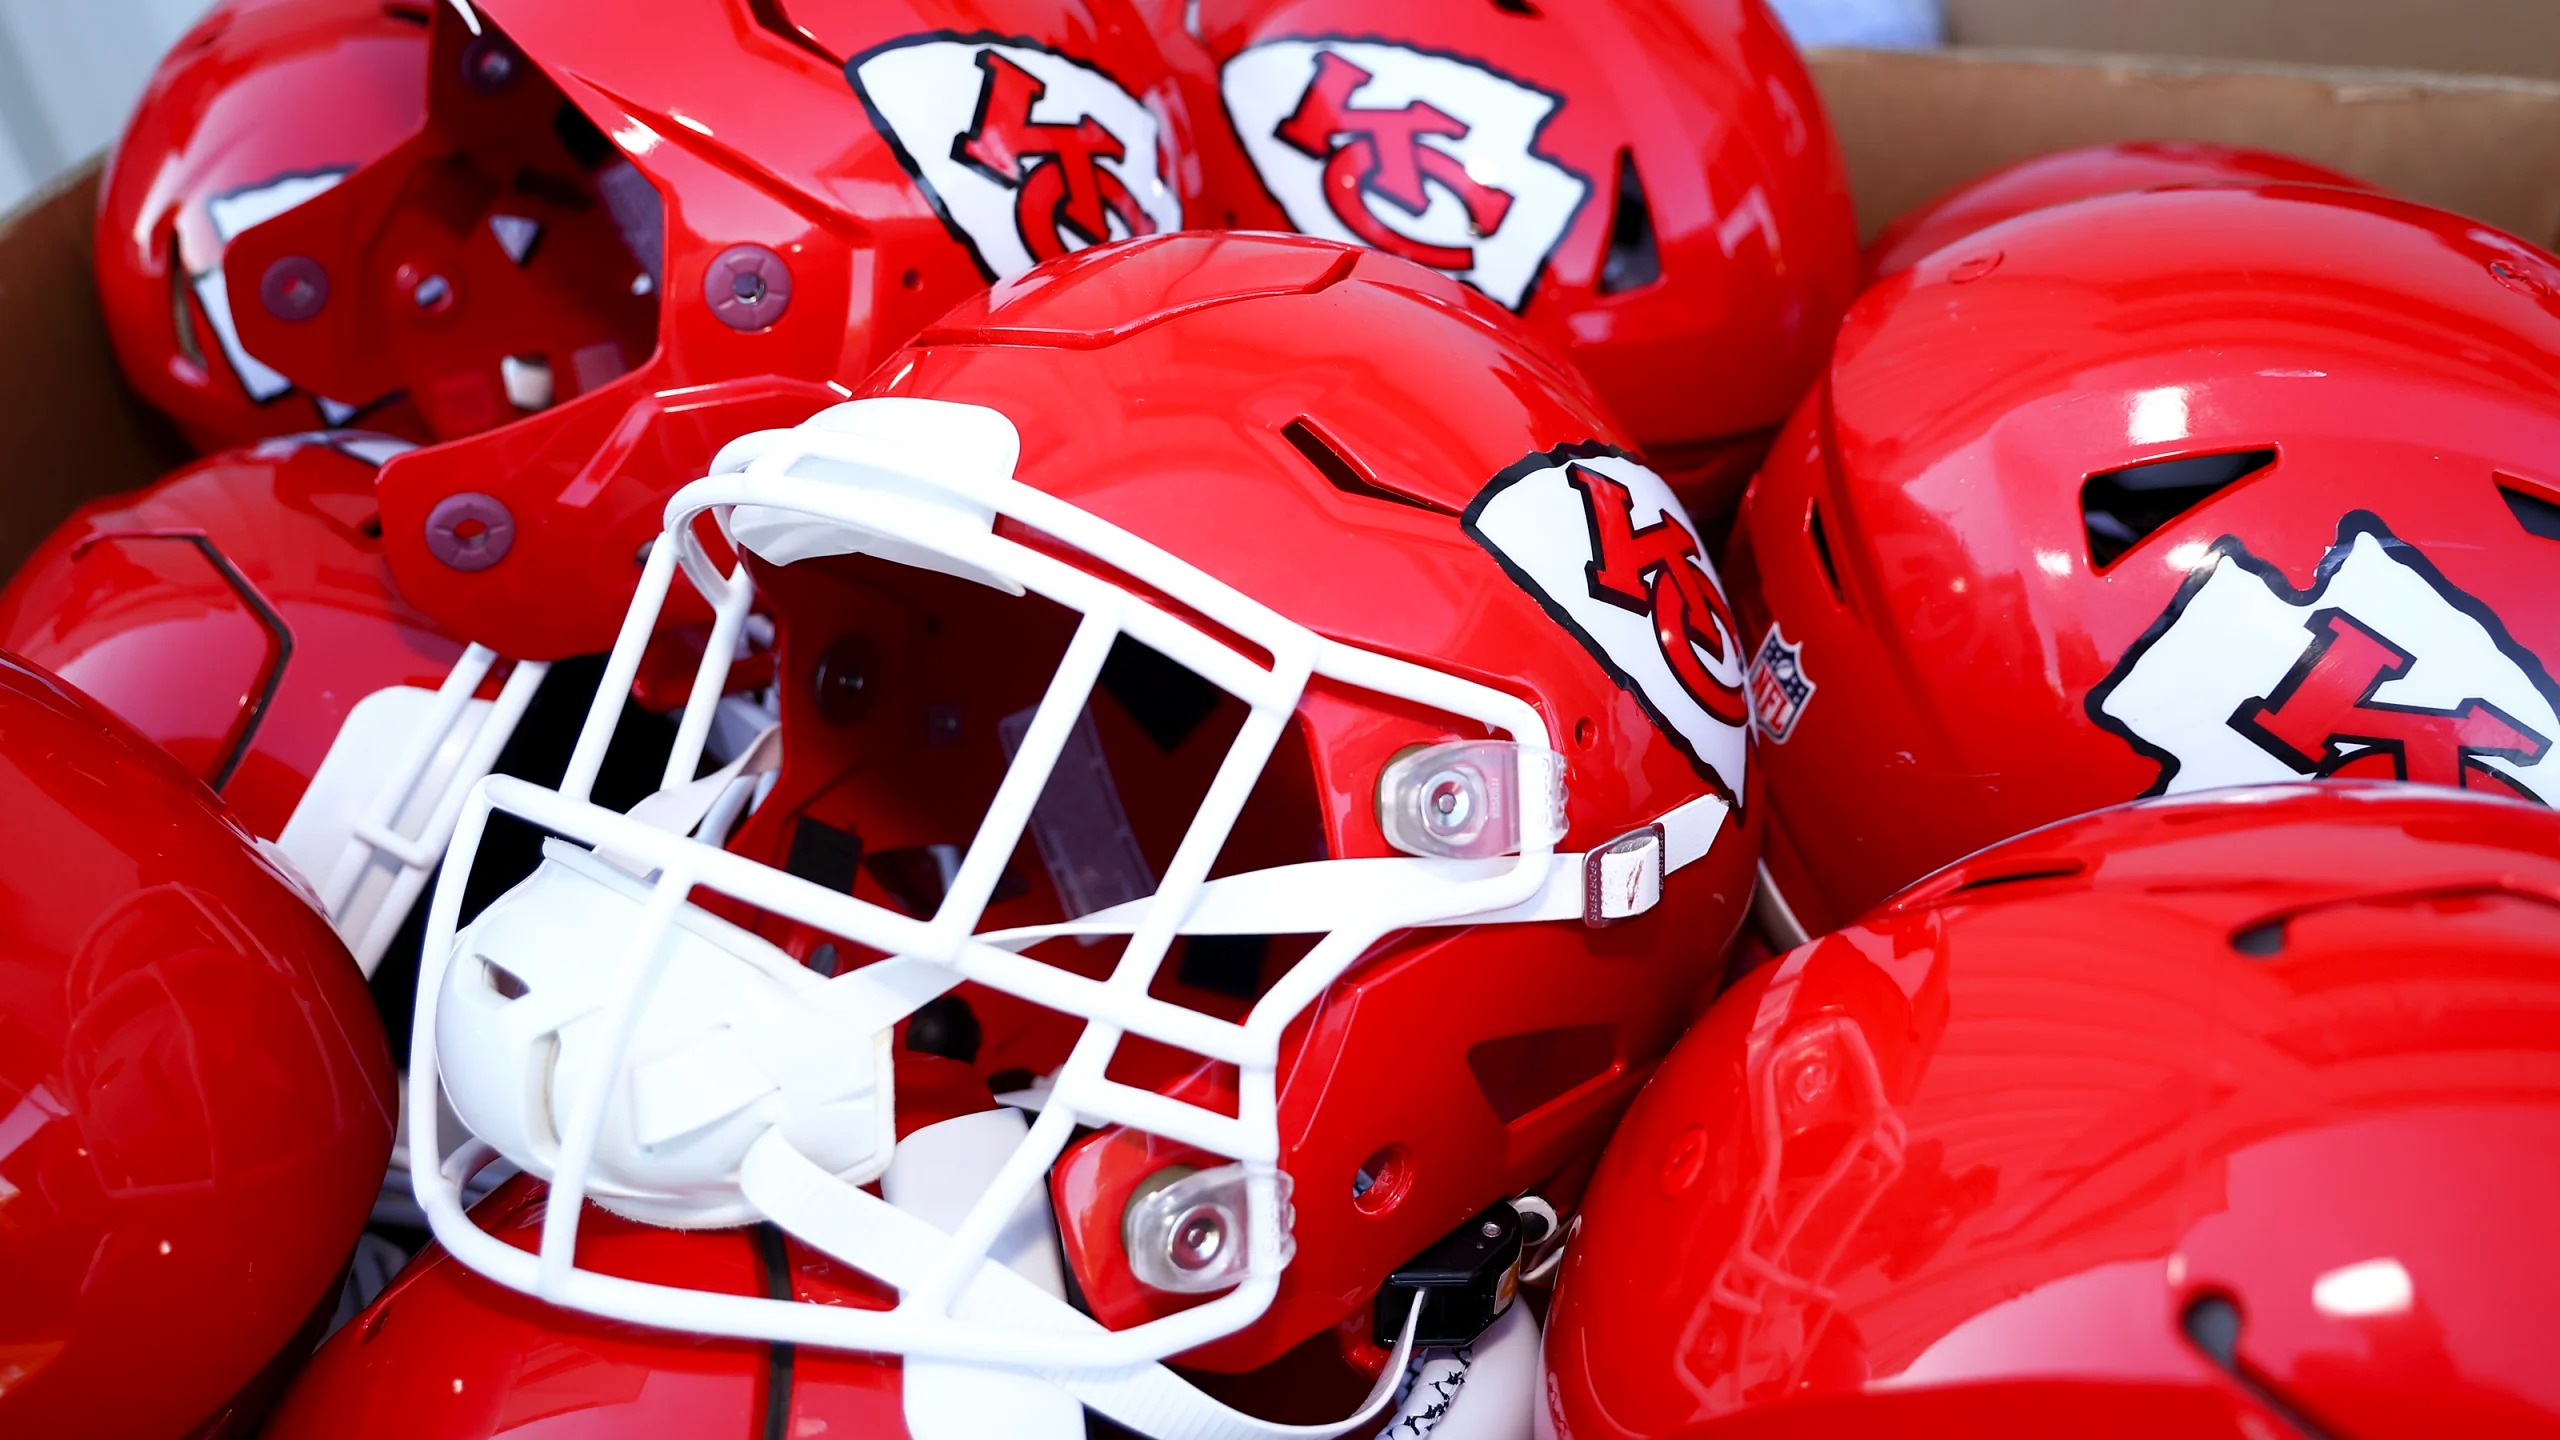 KC Chiefs: Byron Pringle needs more snaps in the offense